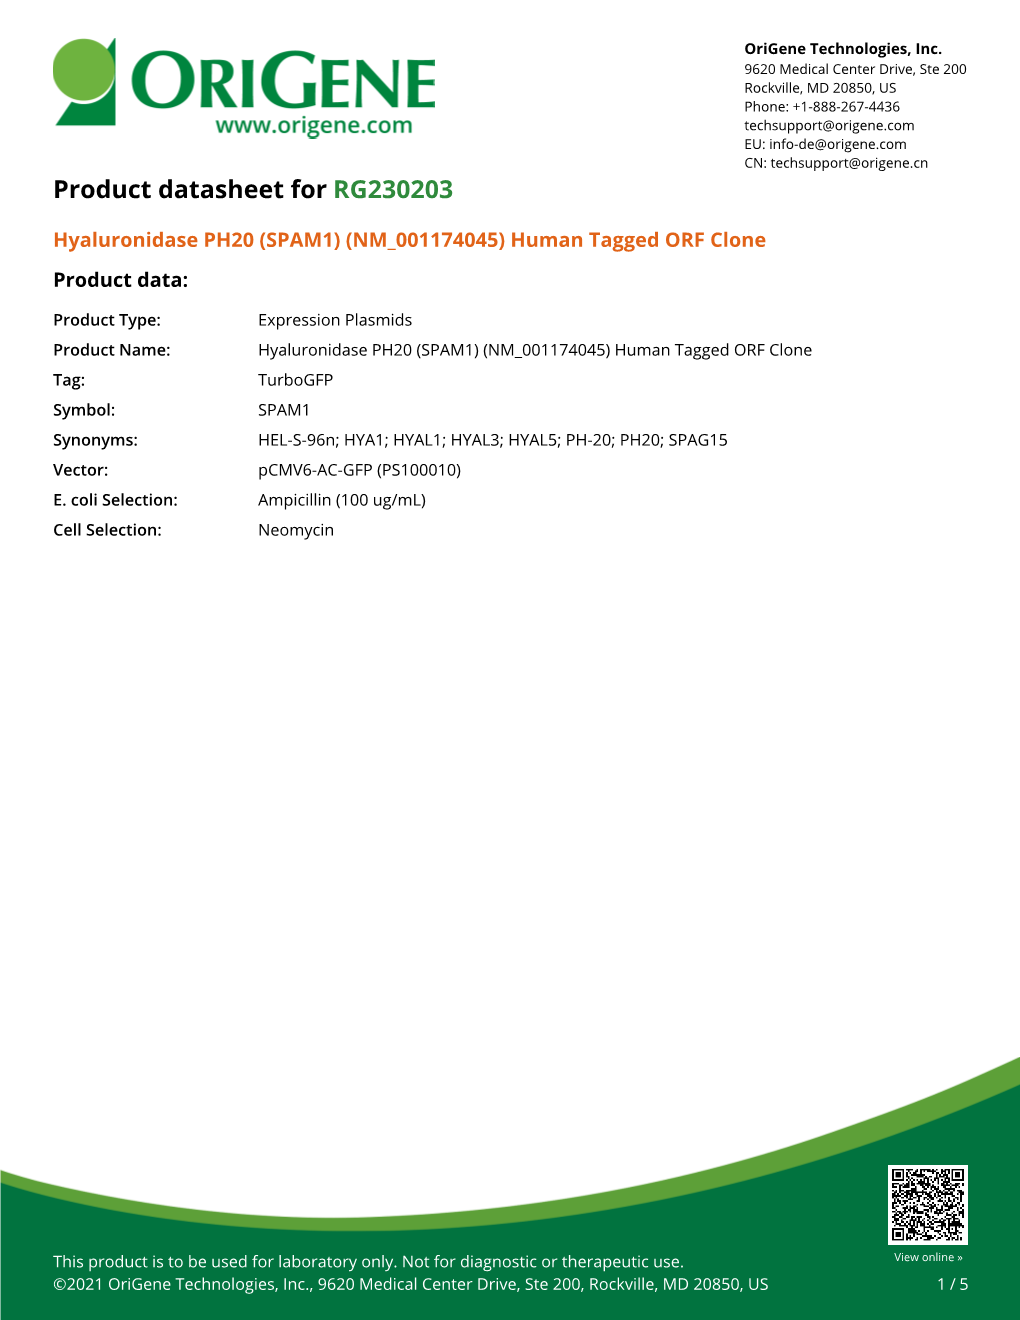 Hyaluronidase PH20 (SPAM1) (NM 001174045) Human Tagged ORF Clone Product Data